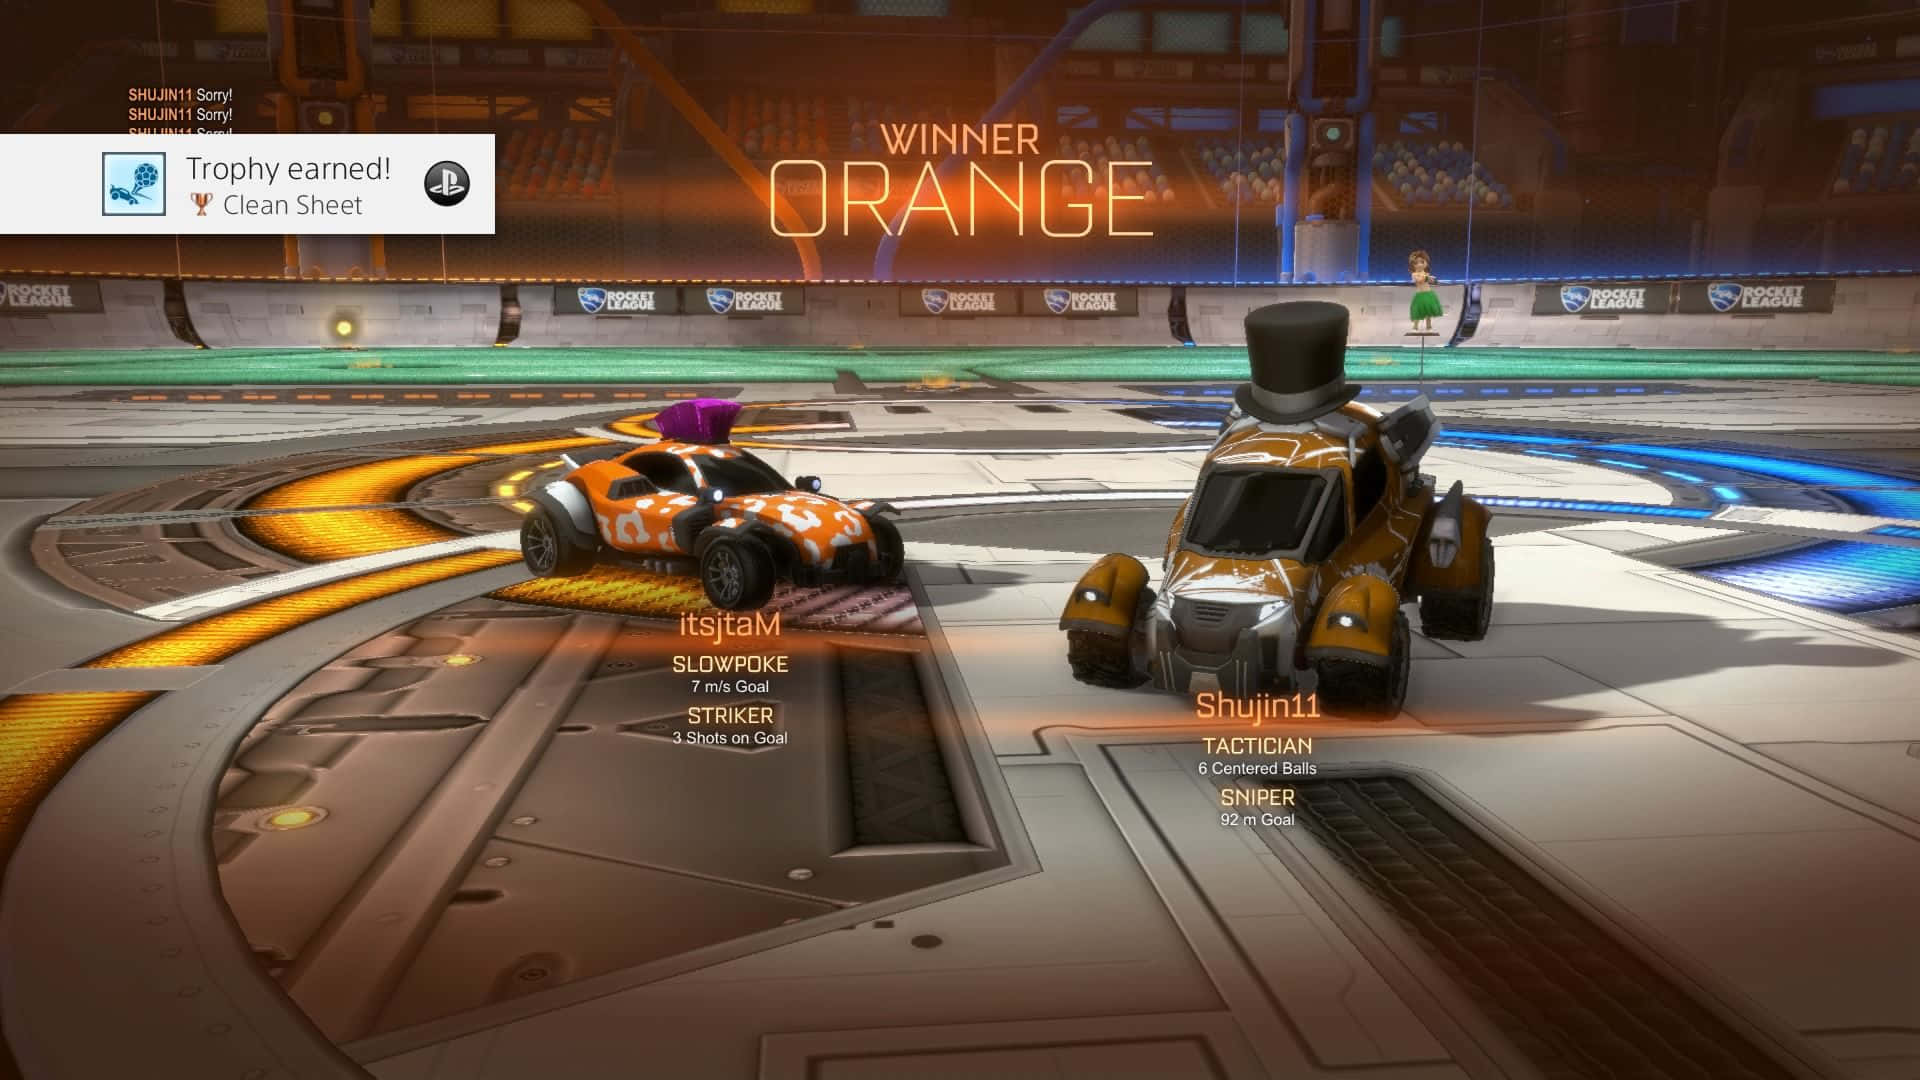 Get ready to enjoy some intense and exhilarating car soccer with Rocket League